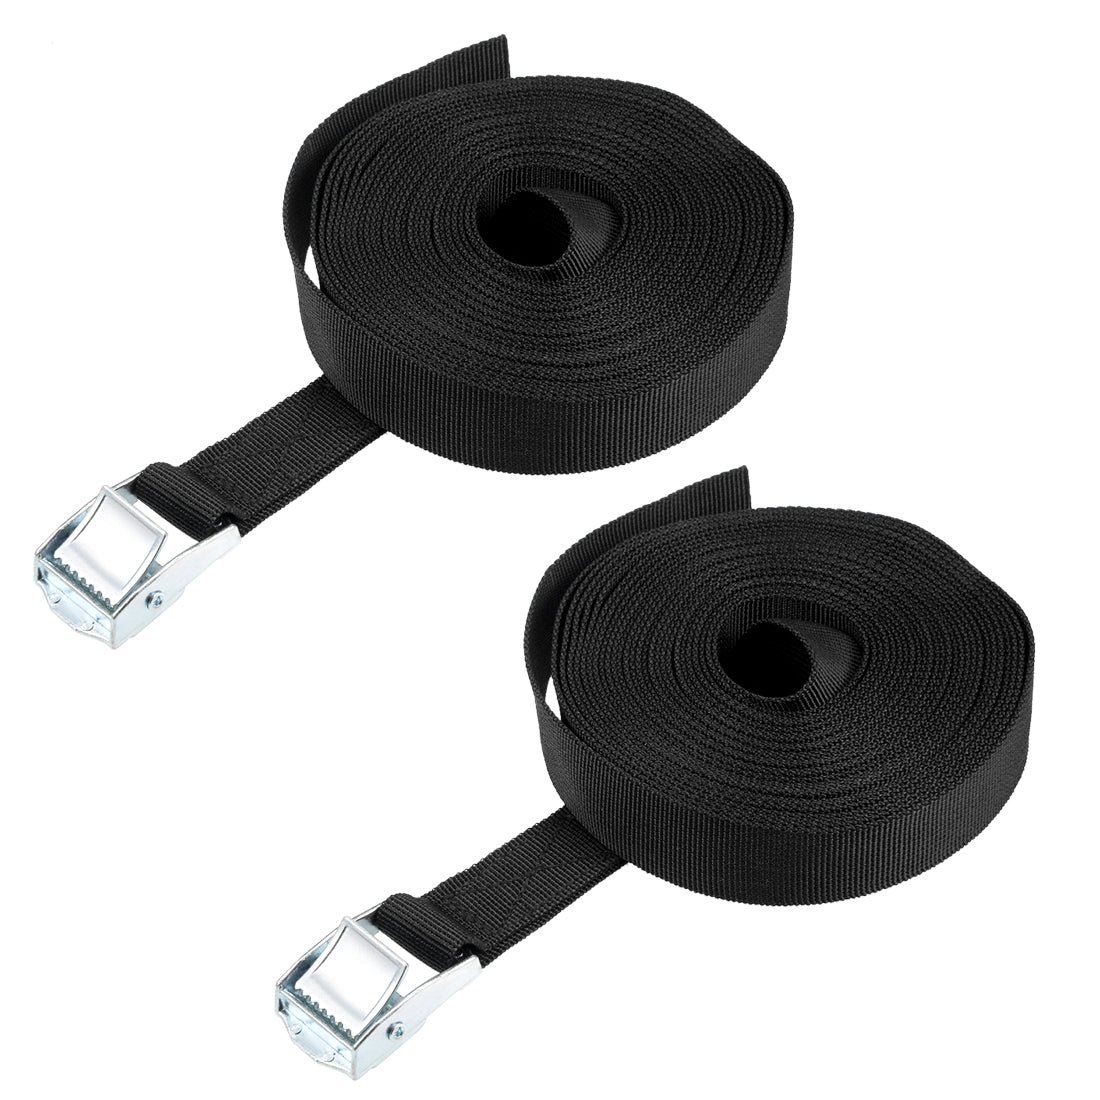 uxcell Uxcell 7M x 25mm Lashing Strap Cargo Tie Down Straps Buckle Up to 80Kg, Black, 2Pcs